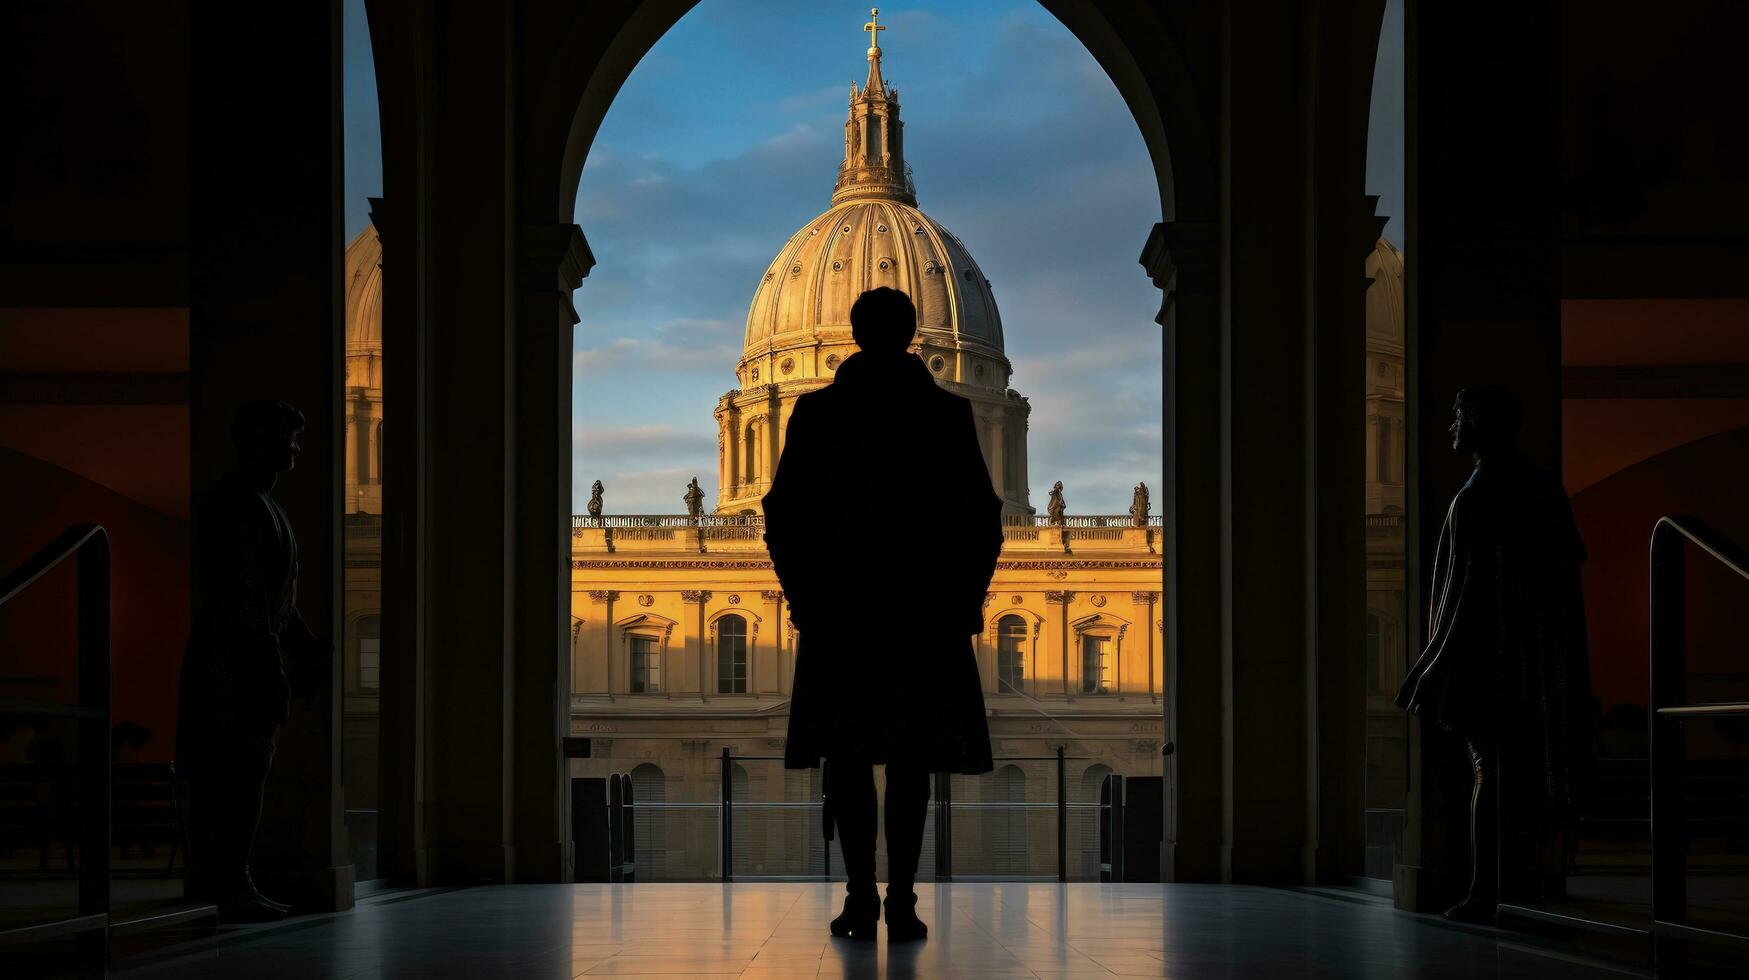 Statue of Napoleon Bonaparte seen from behind at Hotel des Invalides in Paris France. silhouette concept photo